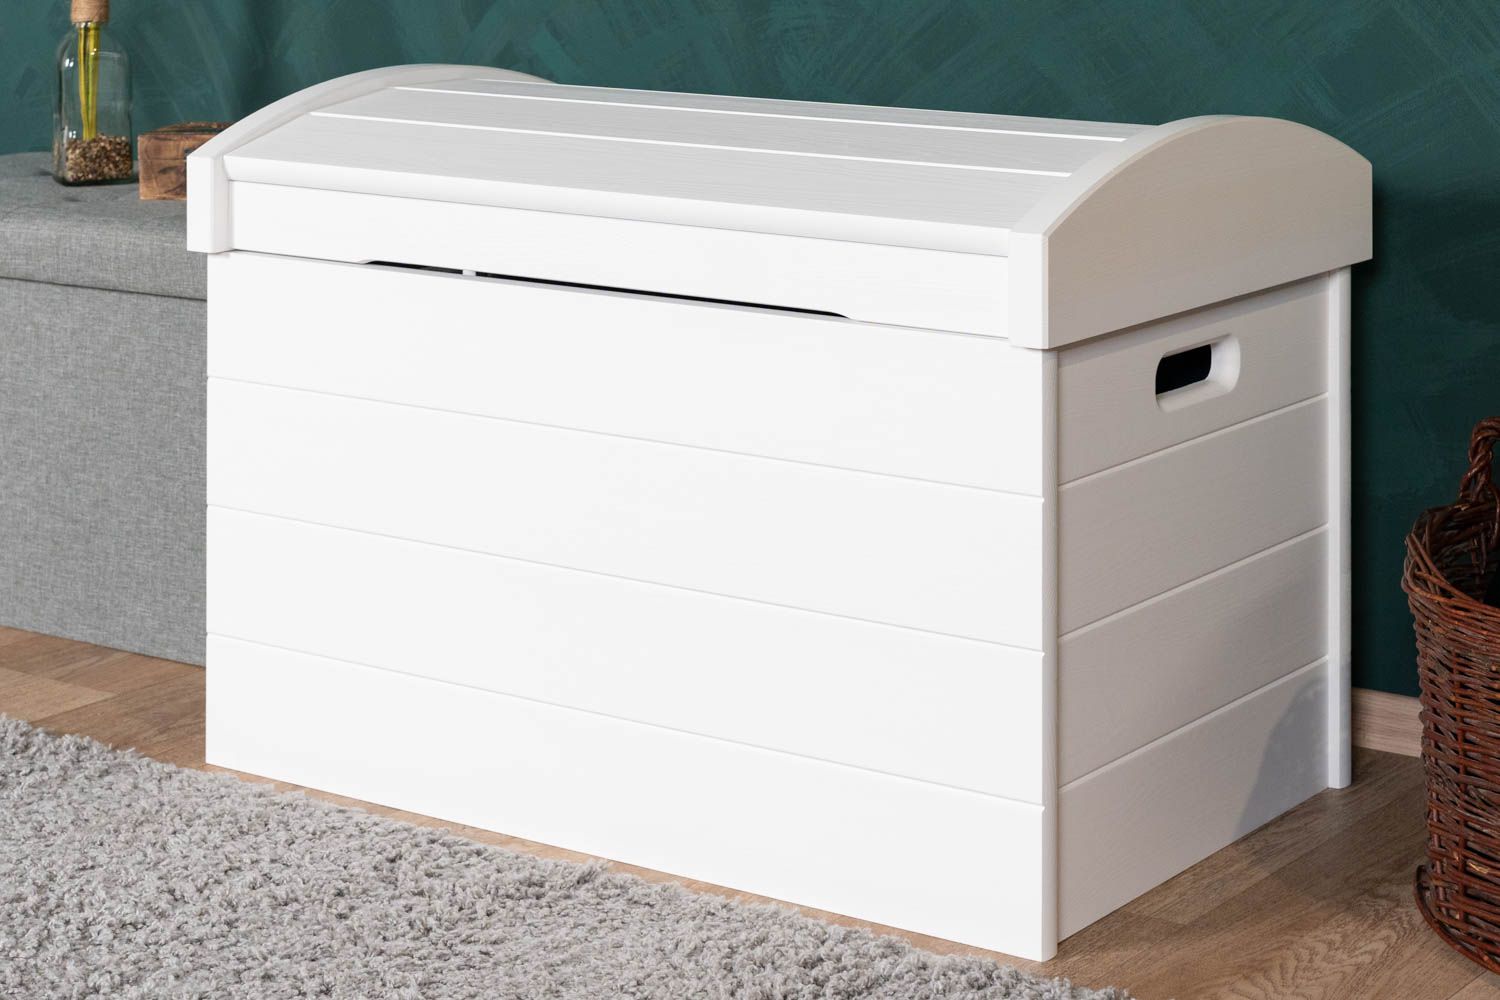 Chest solid pine solid wood white lacquered 183 - Dimensions 77 x 54 x 50 cm